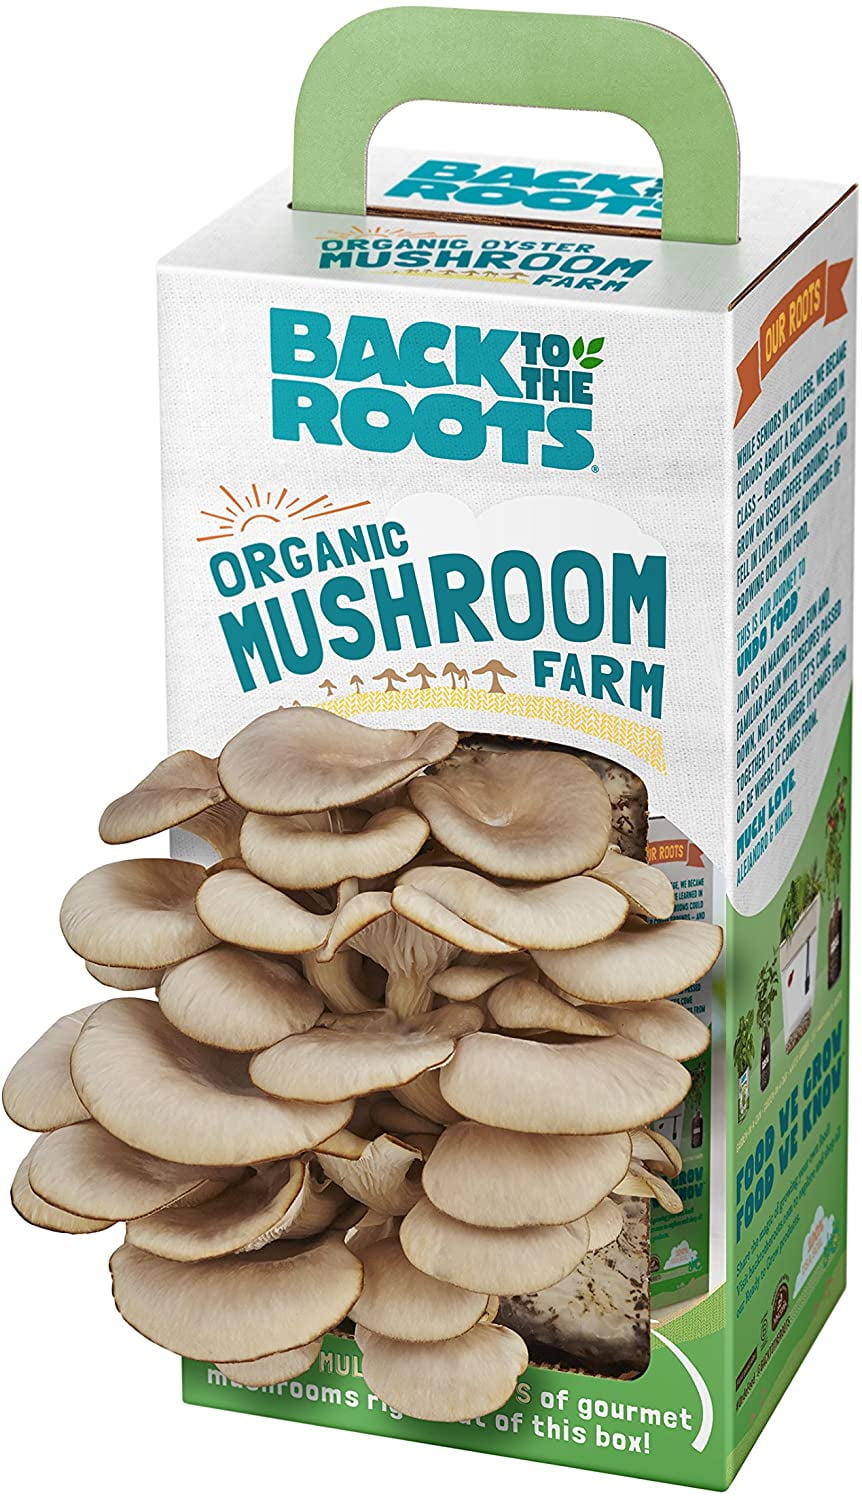 Back to the Roots Organic Mushroom Farm Grow Kit Top Gardening Gift Unique Gift Holiday Gift Harvest Gourmet Oyster Mushrooms In 10 days 